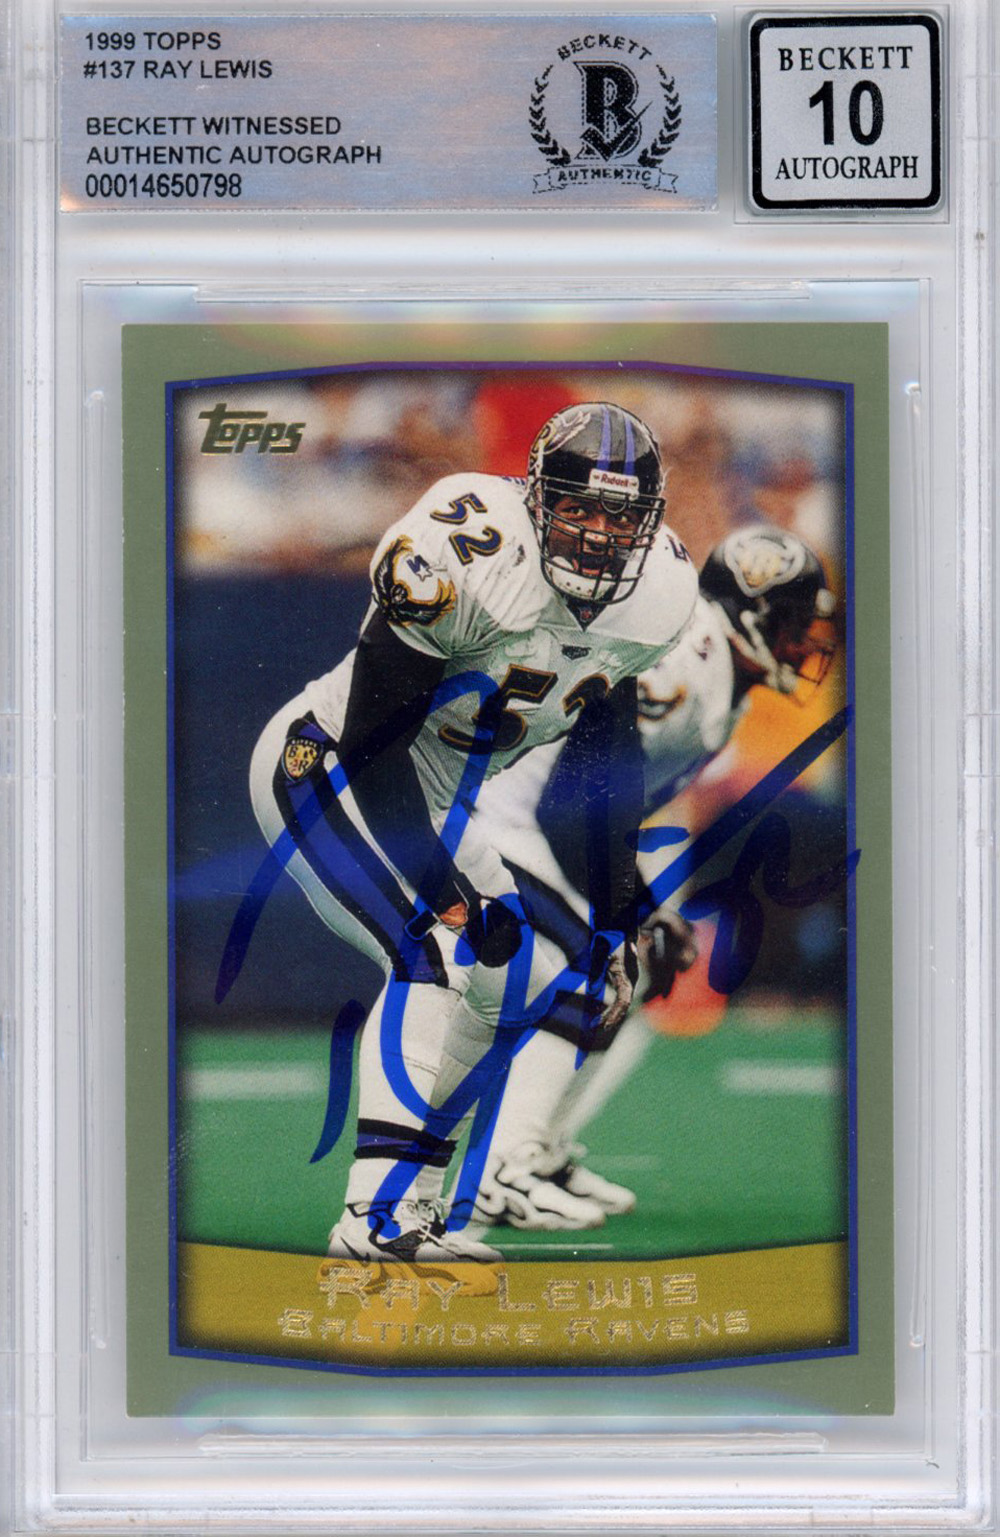 Ray Lewis Autographed/Signed 1999 Topps #137 Trading Card Beckett Slab